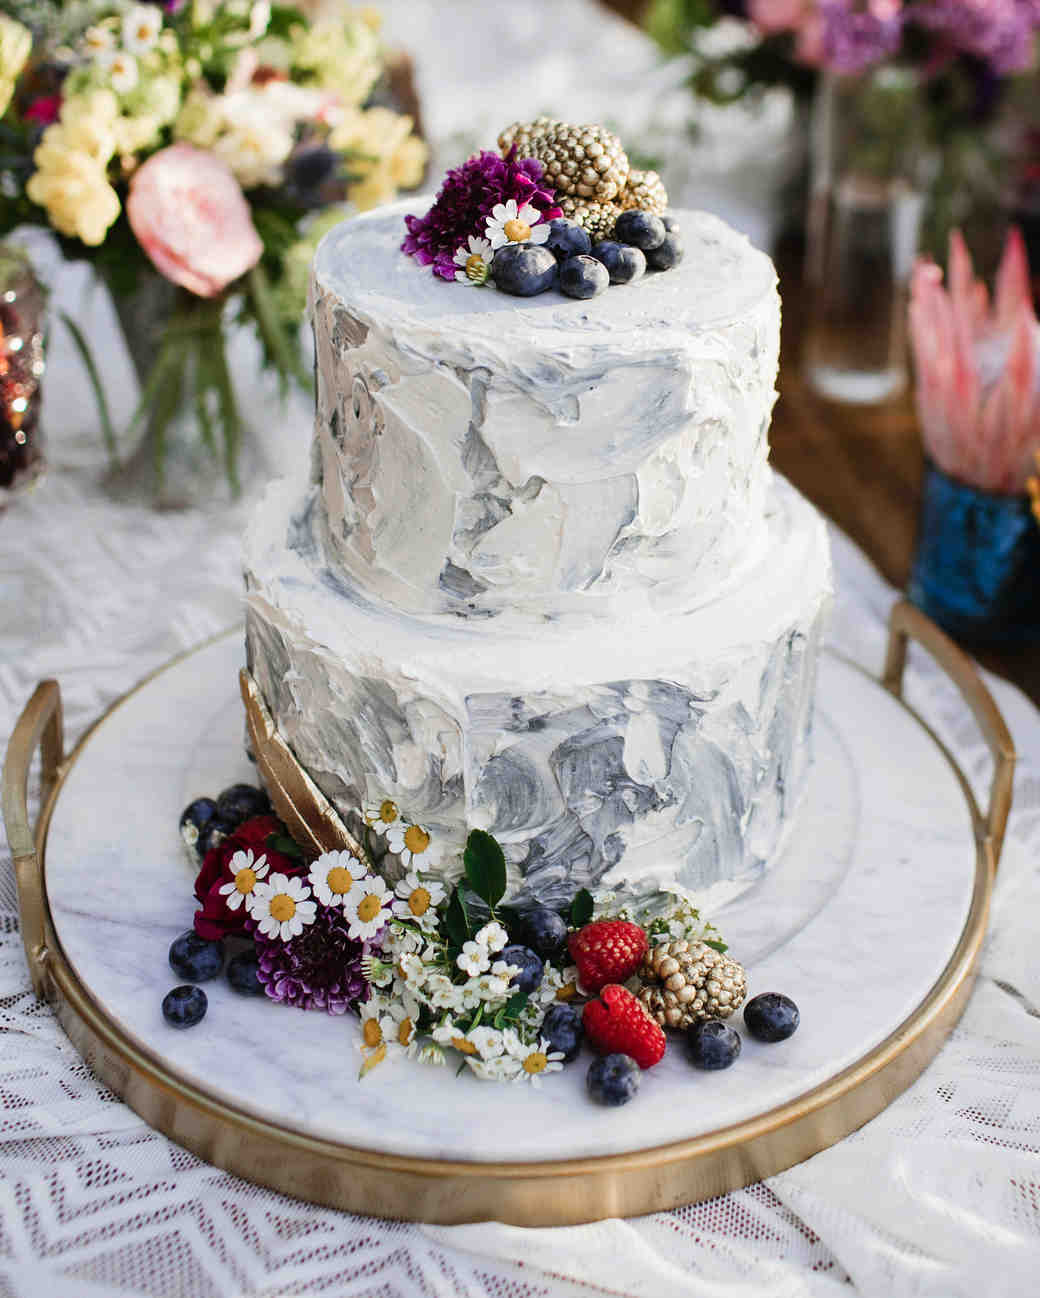 25 Wedding  Cake  Design  Ideas  That ll Wow Your Guests 